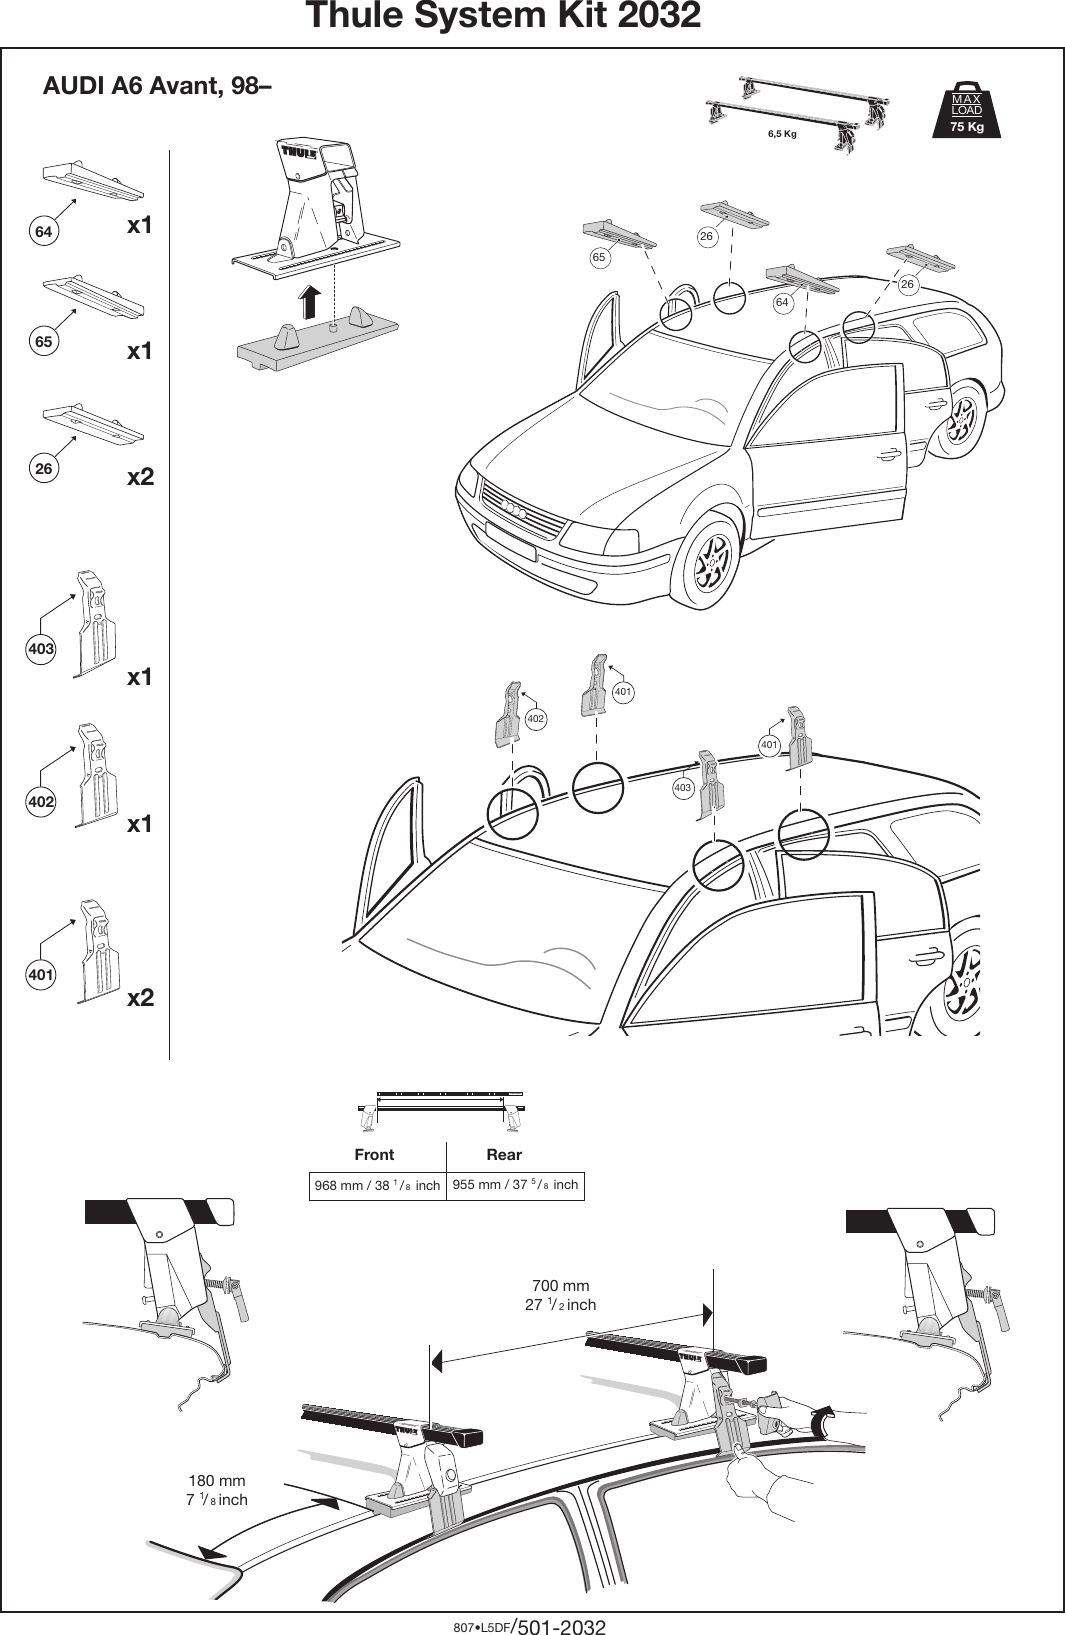 Page 1 of 1 - Thule Thule-Kit-2032-Users-Manual- Kit 2032.FH8  Thule-kit-2032-users-manual